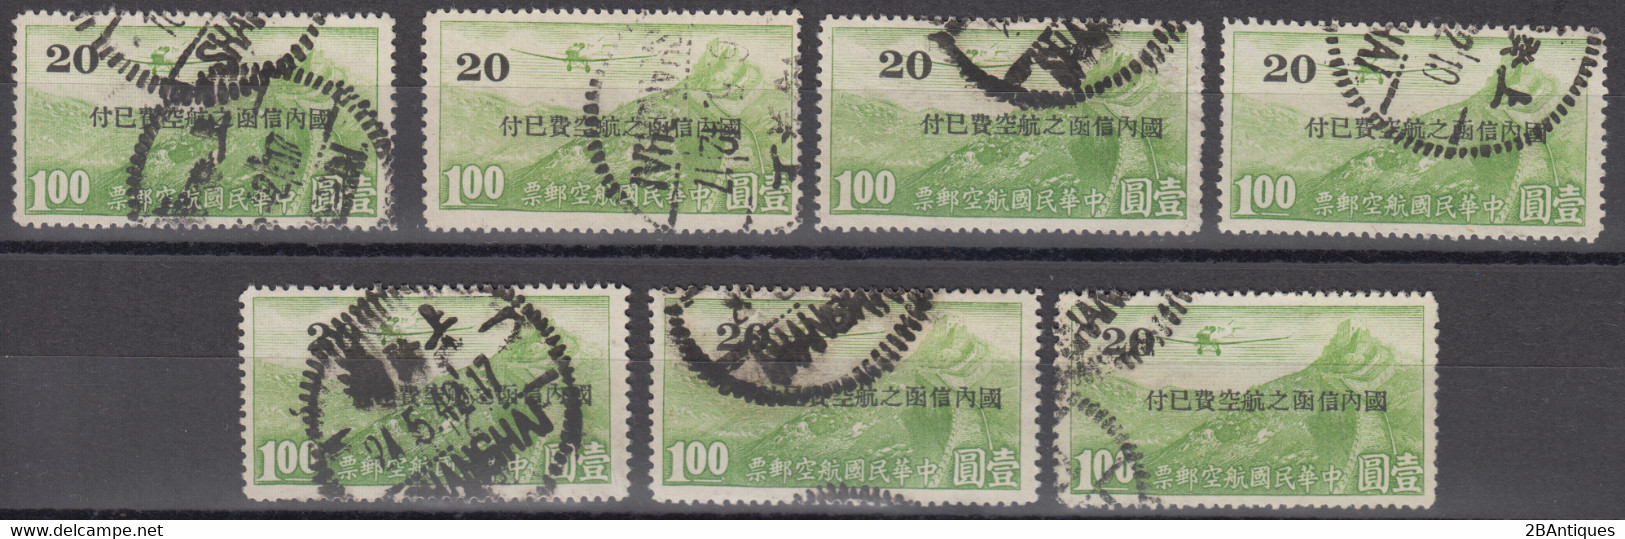 JAPANESE OCCUPATION OF CHINA 1941 - 7 X Airmail Stamp - 1941-45 China Dela Norte